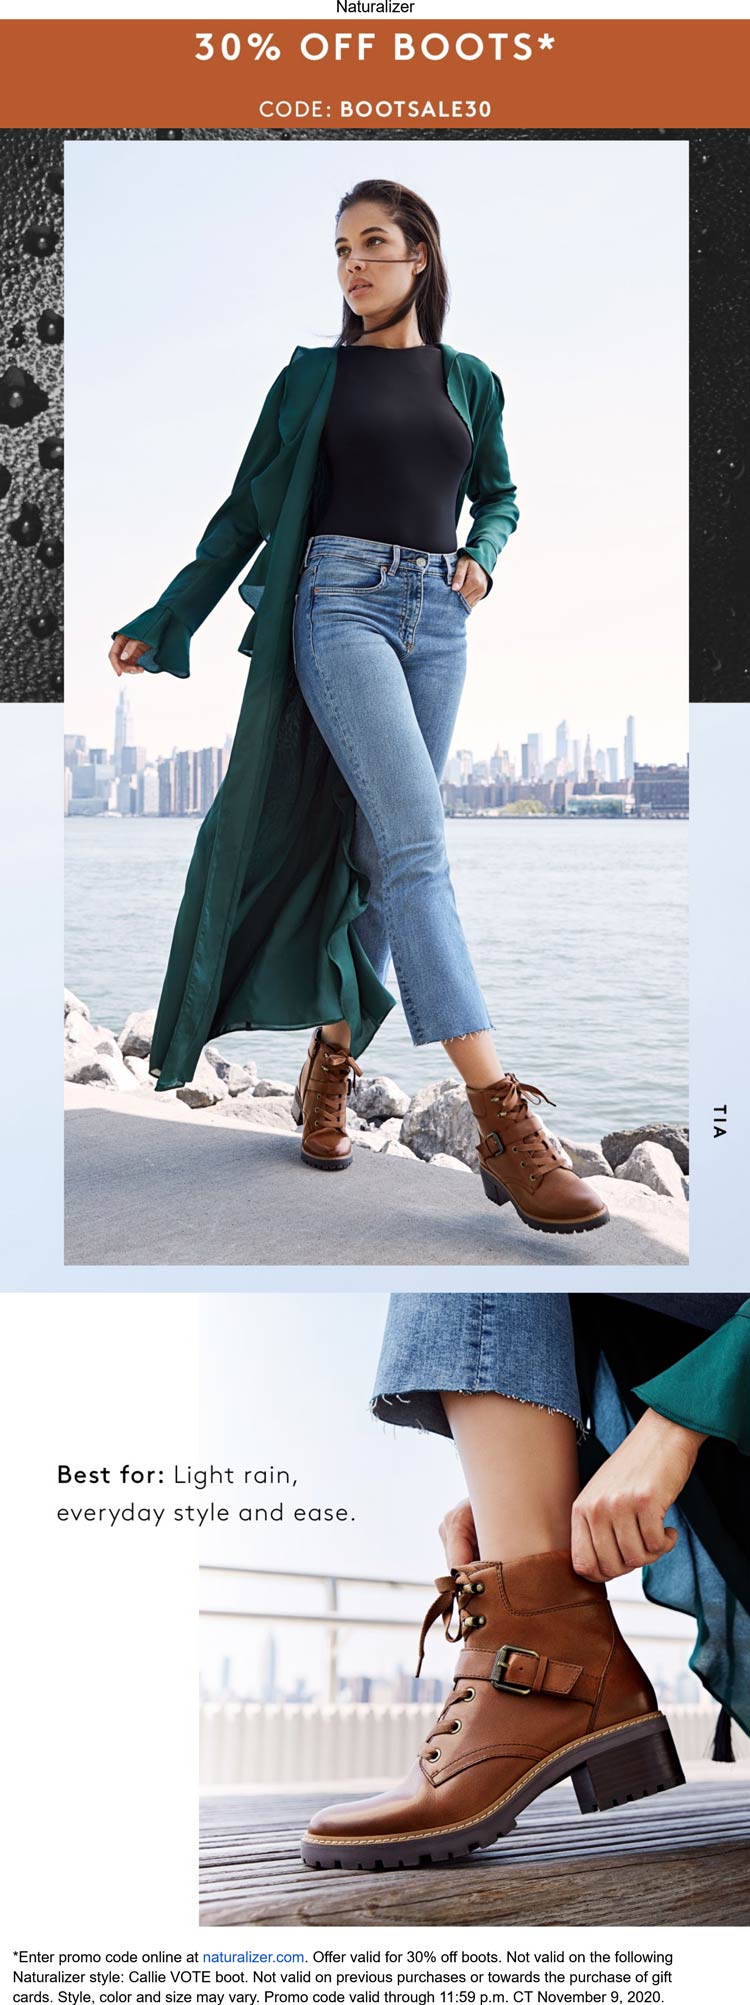 Naturalizer stores Coupon  30% off boots at Naturalizer via promo code BOOTSALE30 #naturalizer 